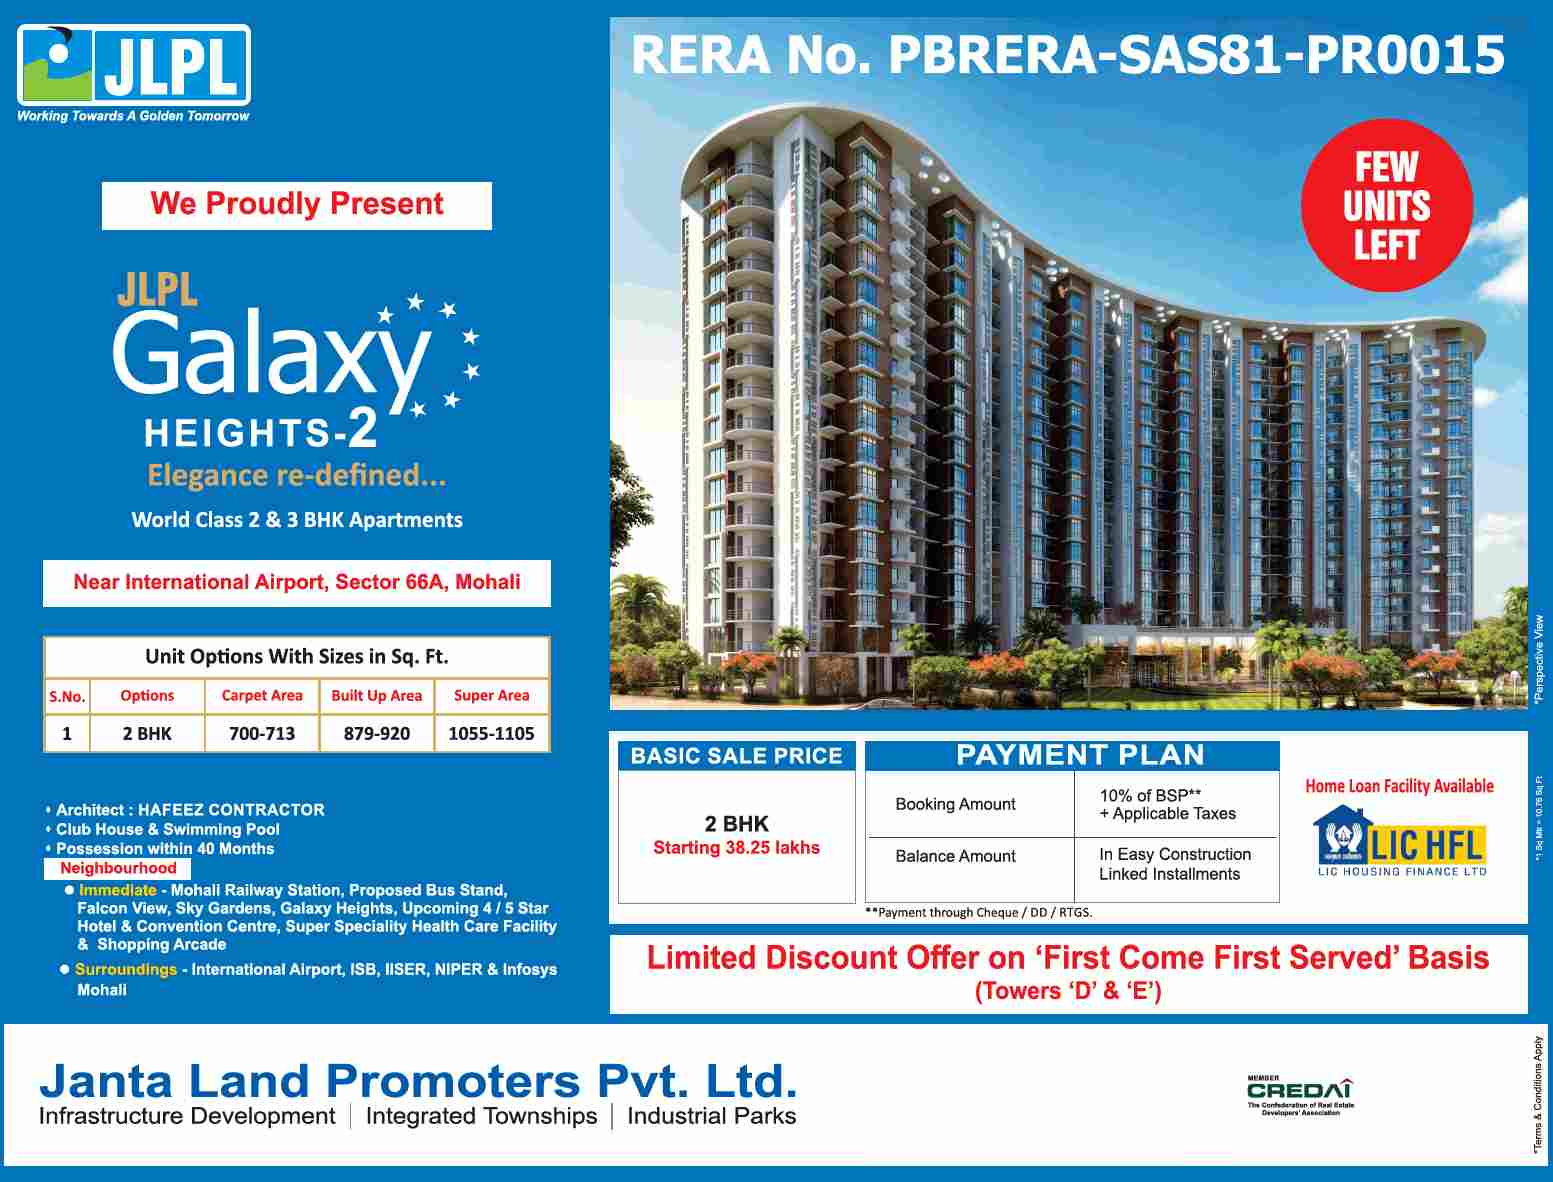 Book 2 BHK @ Rs 38.25 lakhs at JLPL Galaxy Heights 2 in Mohali Update